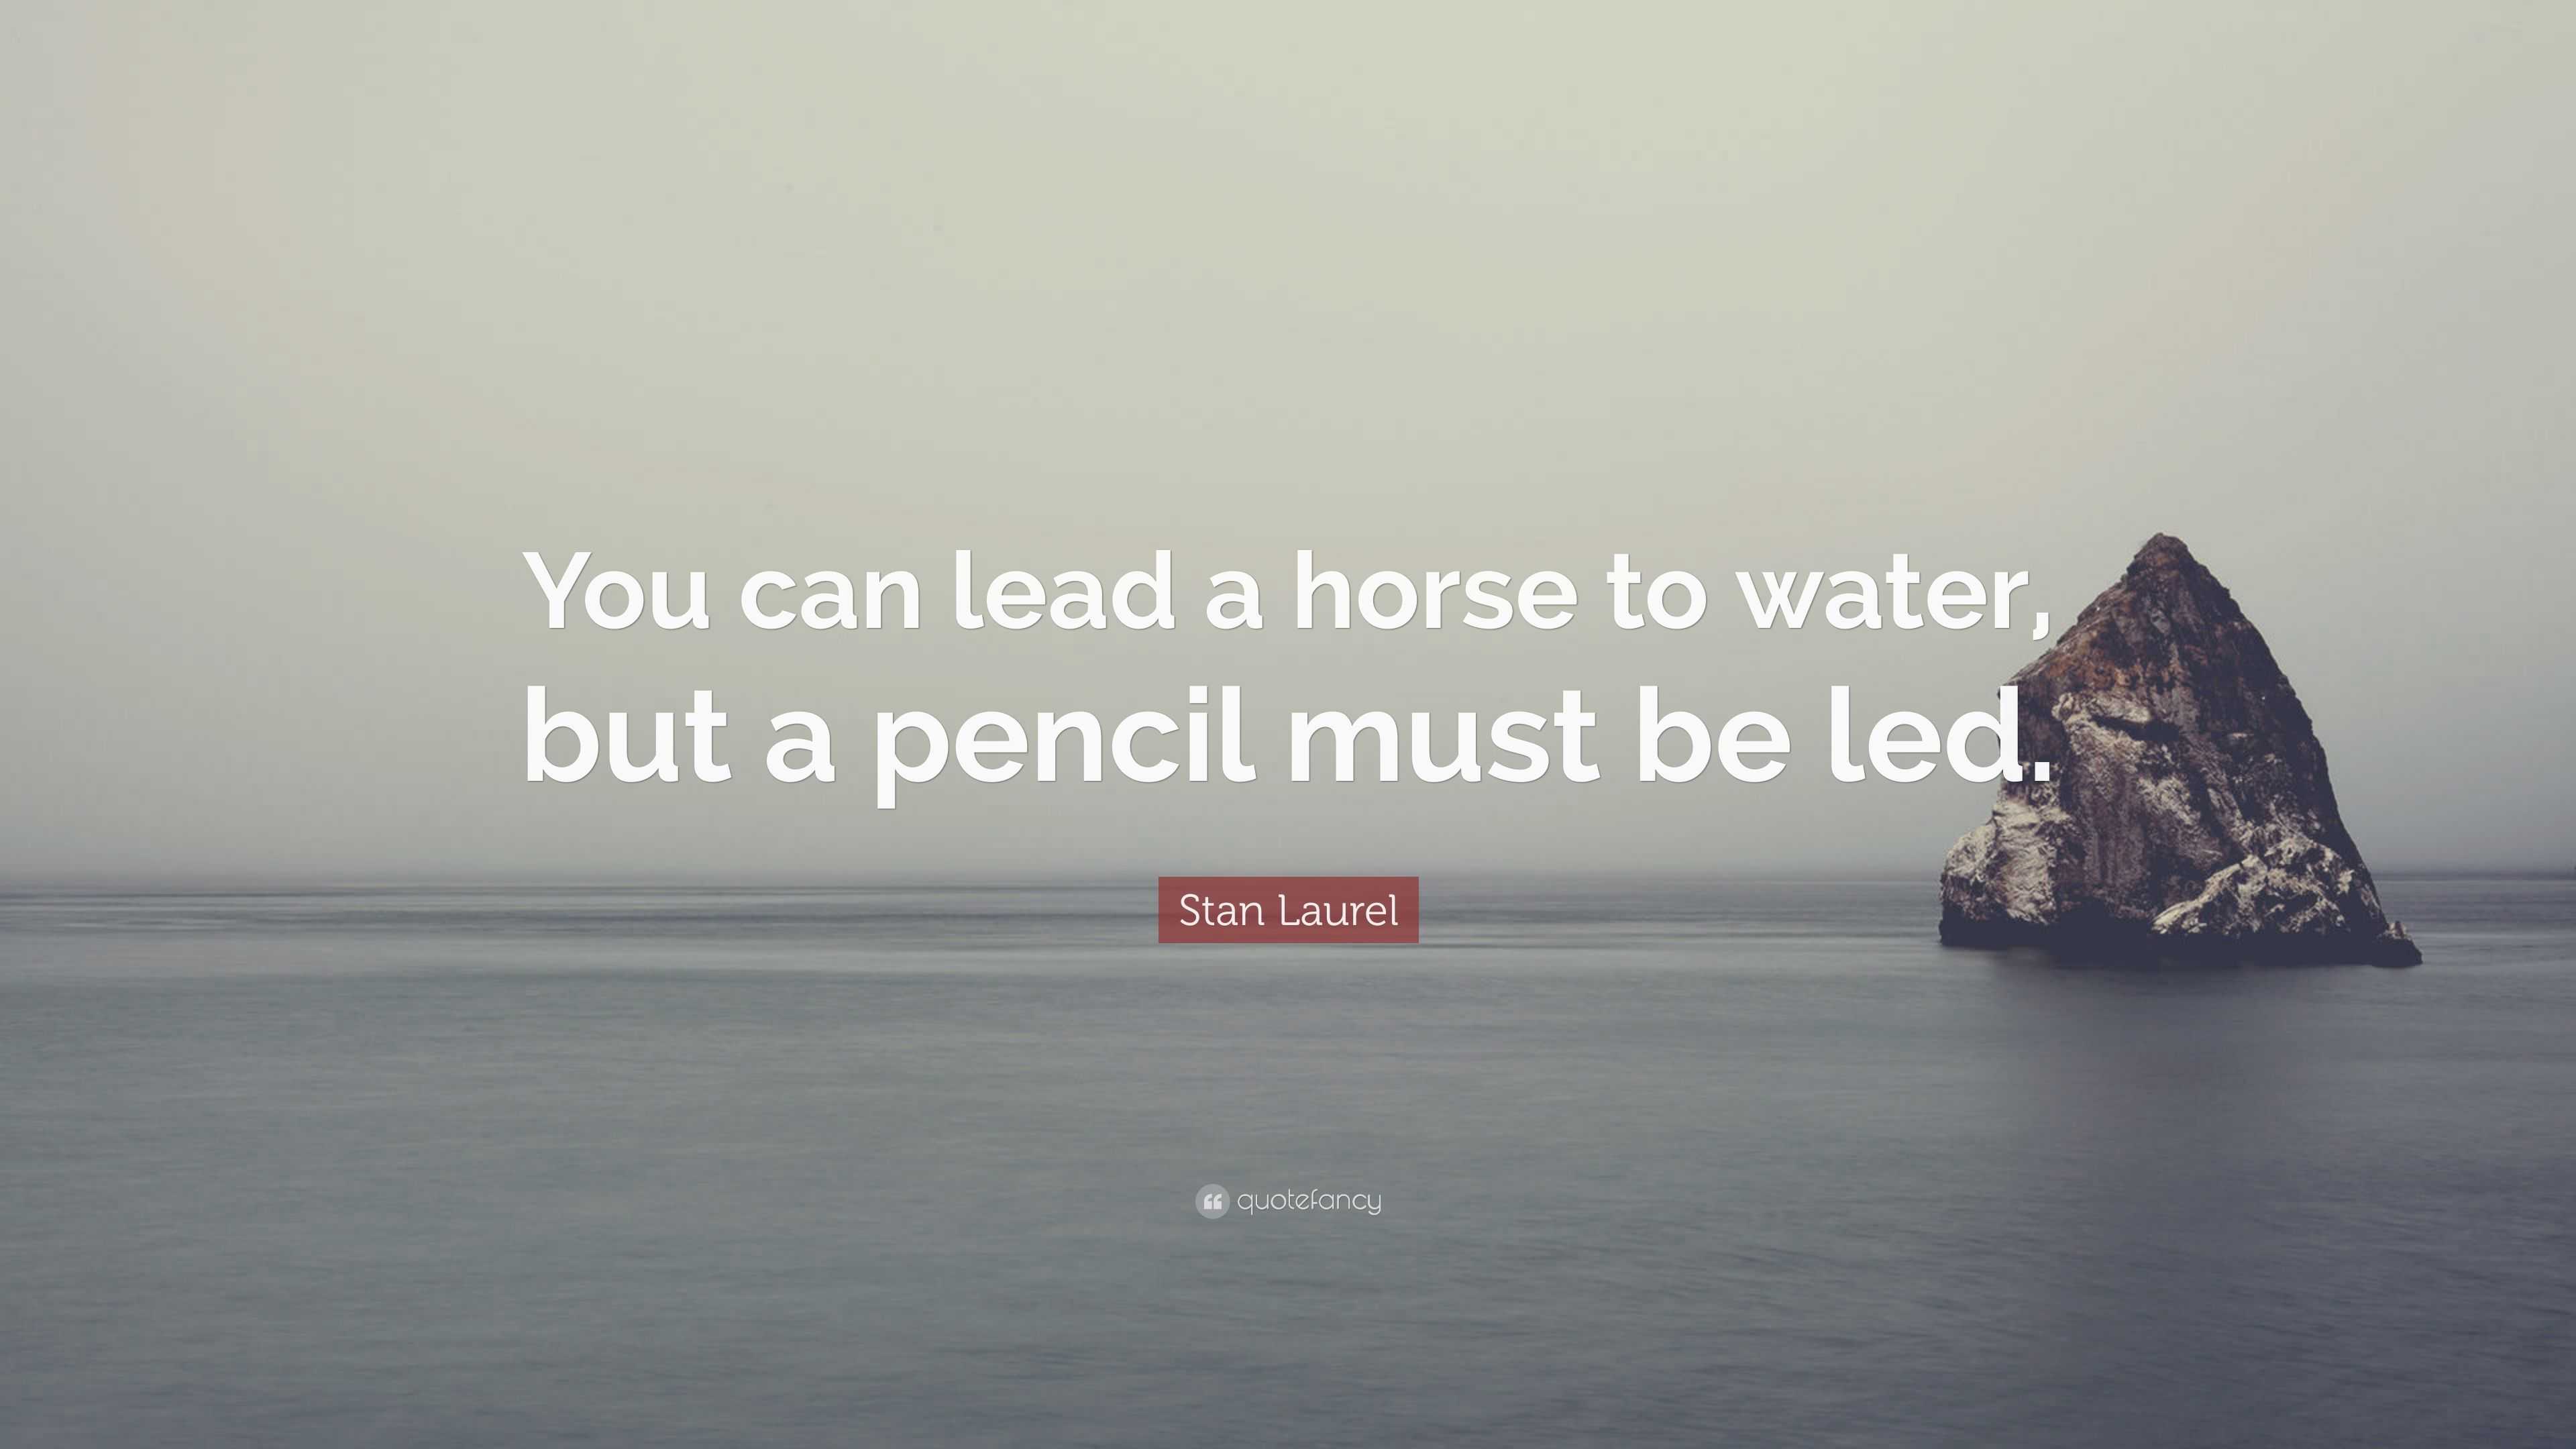 Stan Laurel Quote: “You can lead a horse to water, but a pencil must be